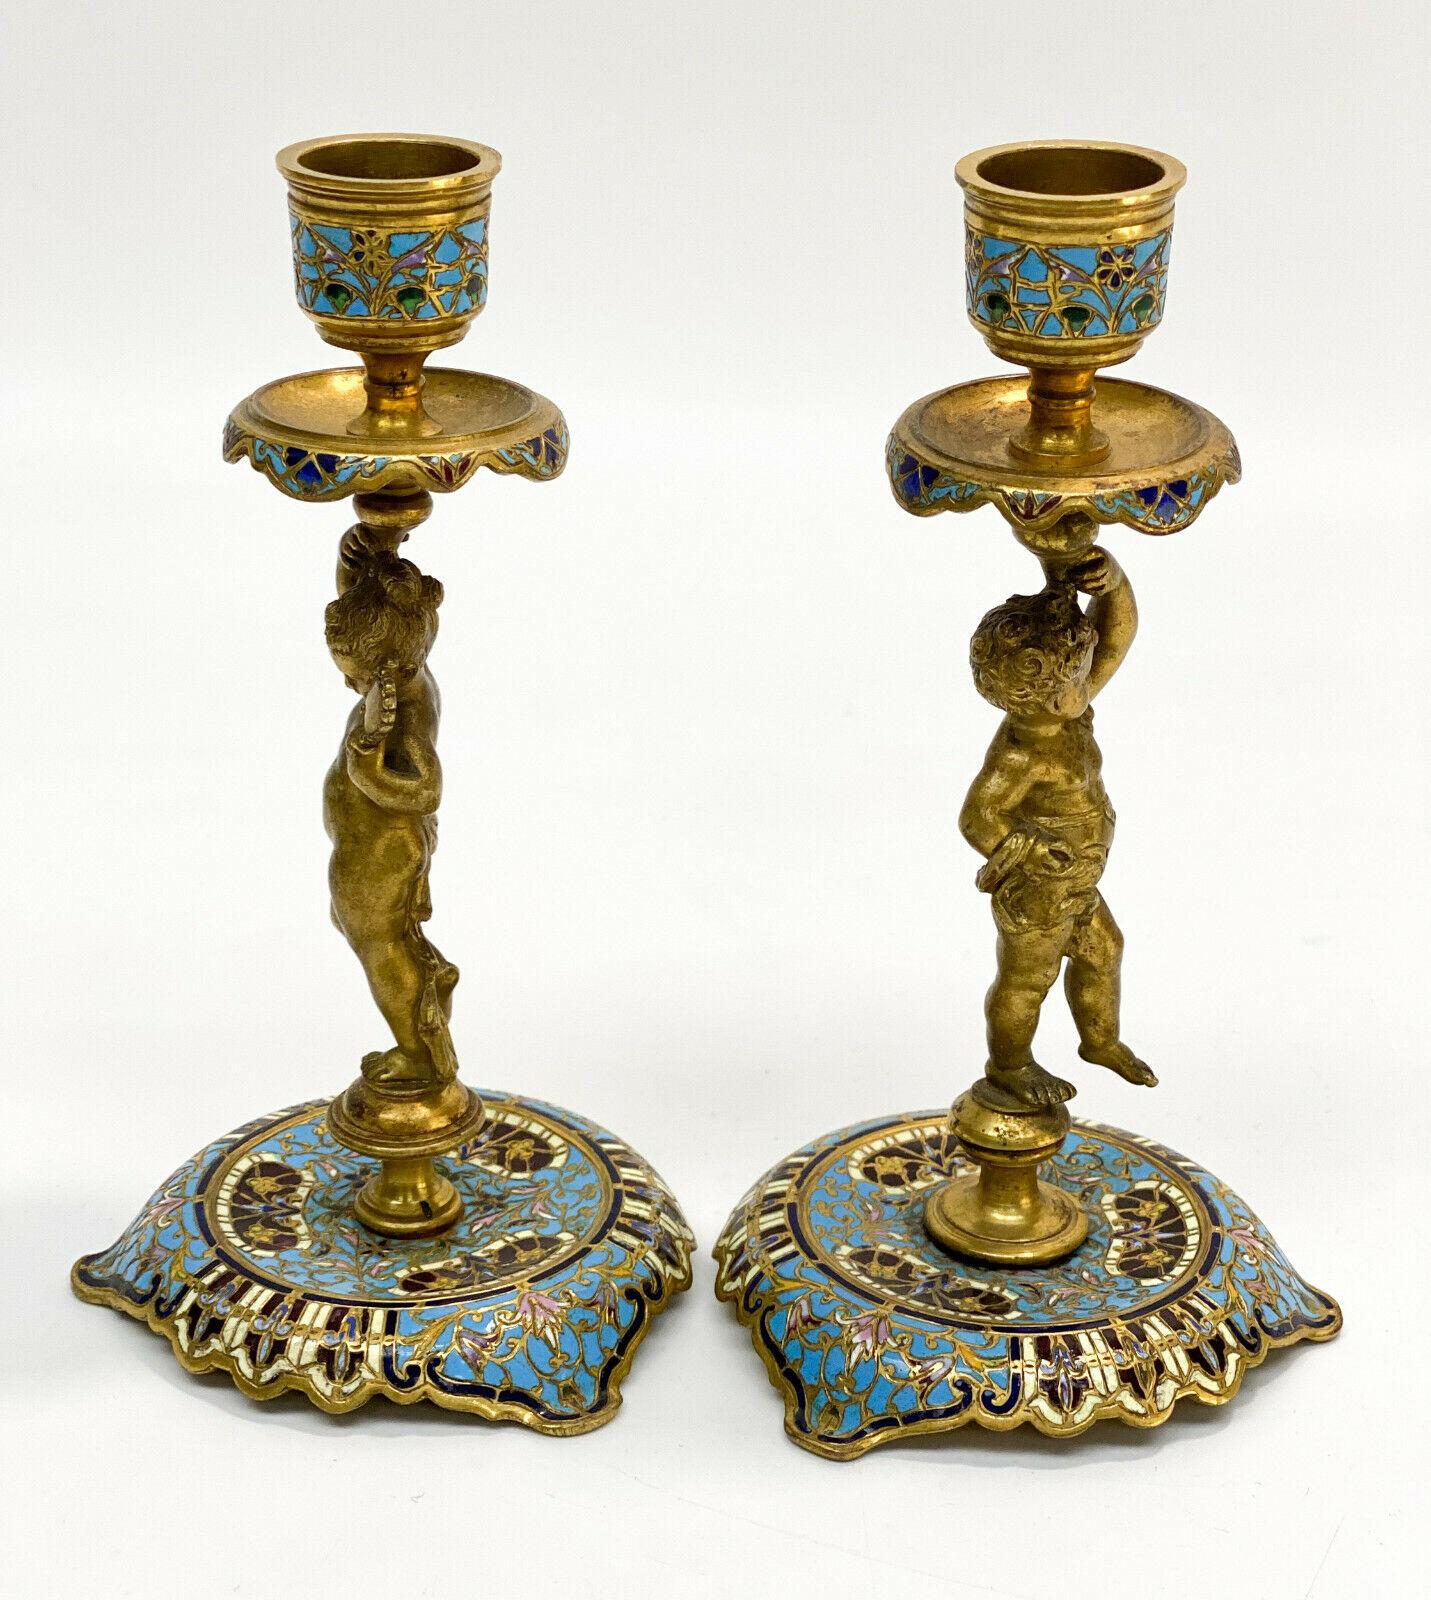 Porcelain Pair of French Champleve Enamel Bronze Candlesticks, Late 19th Century